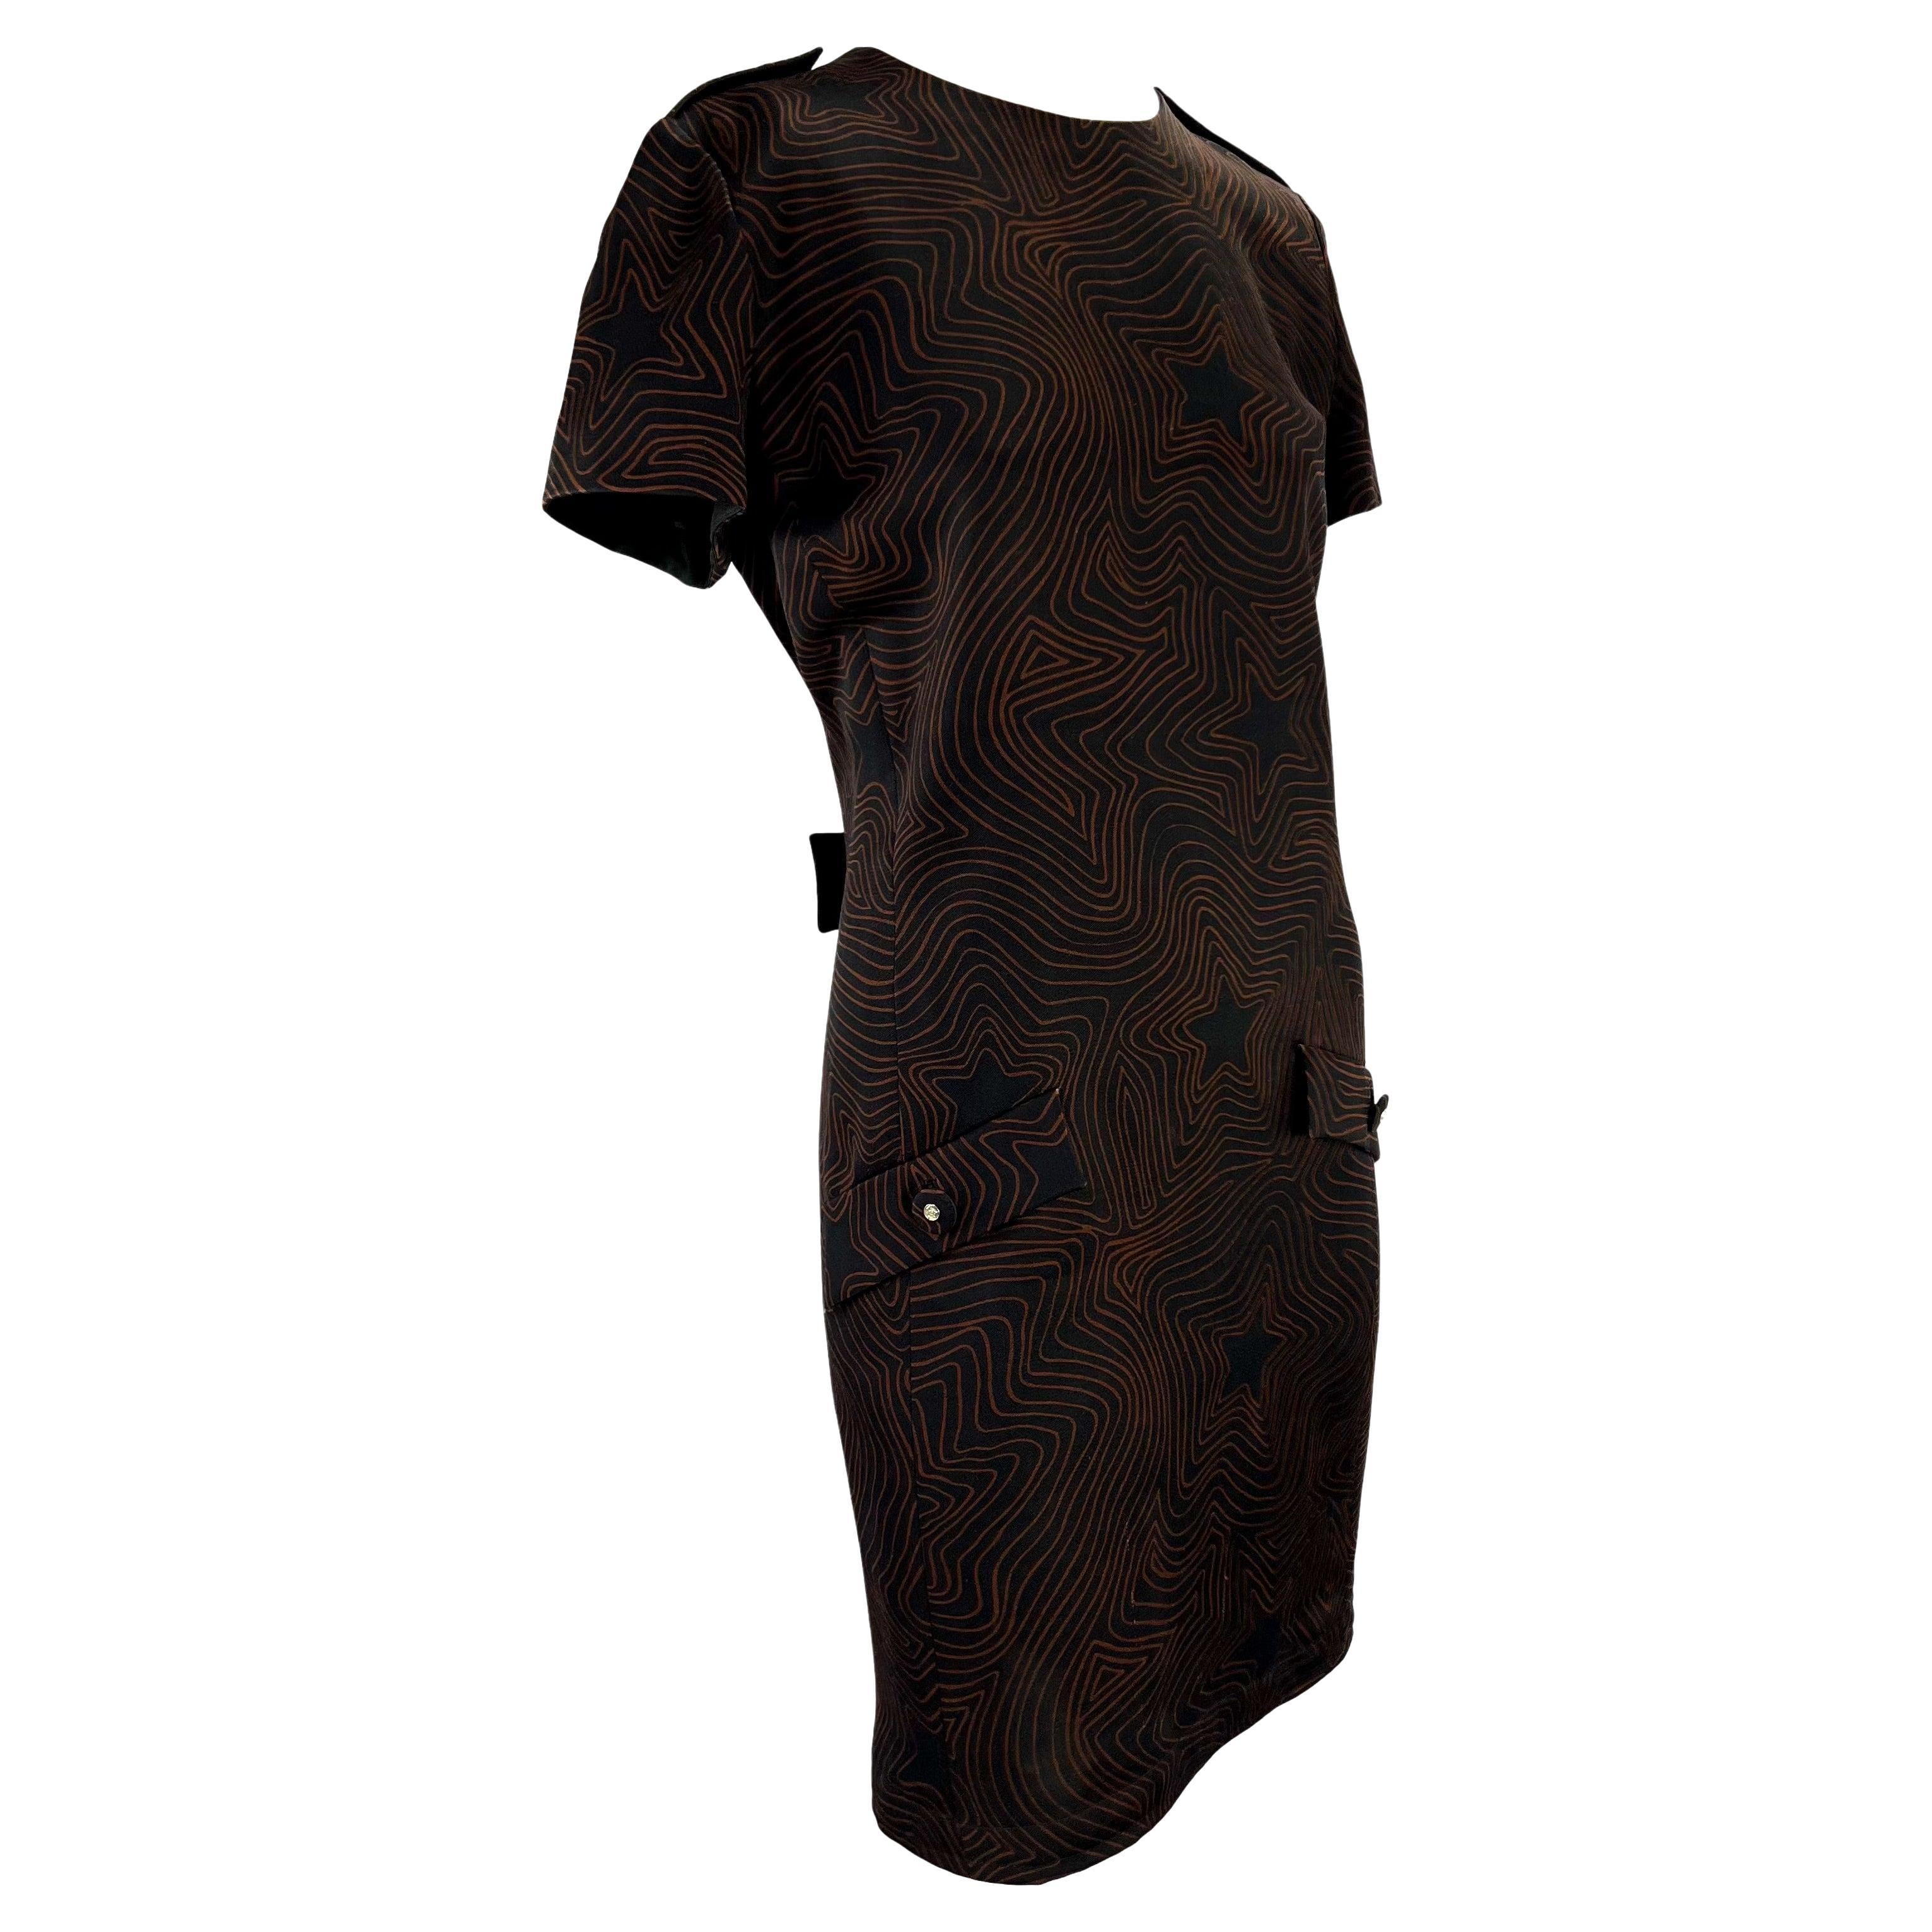 S/S 1996 Gianni Versace Couture Black Brown Star Print Medusa Wool Dress For Sale 2